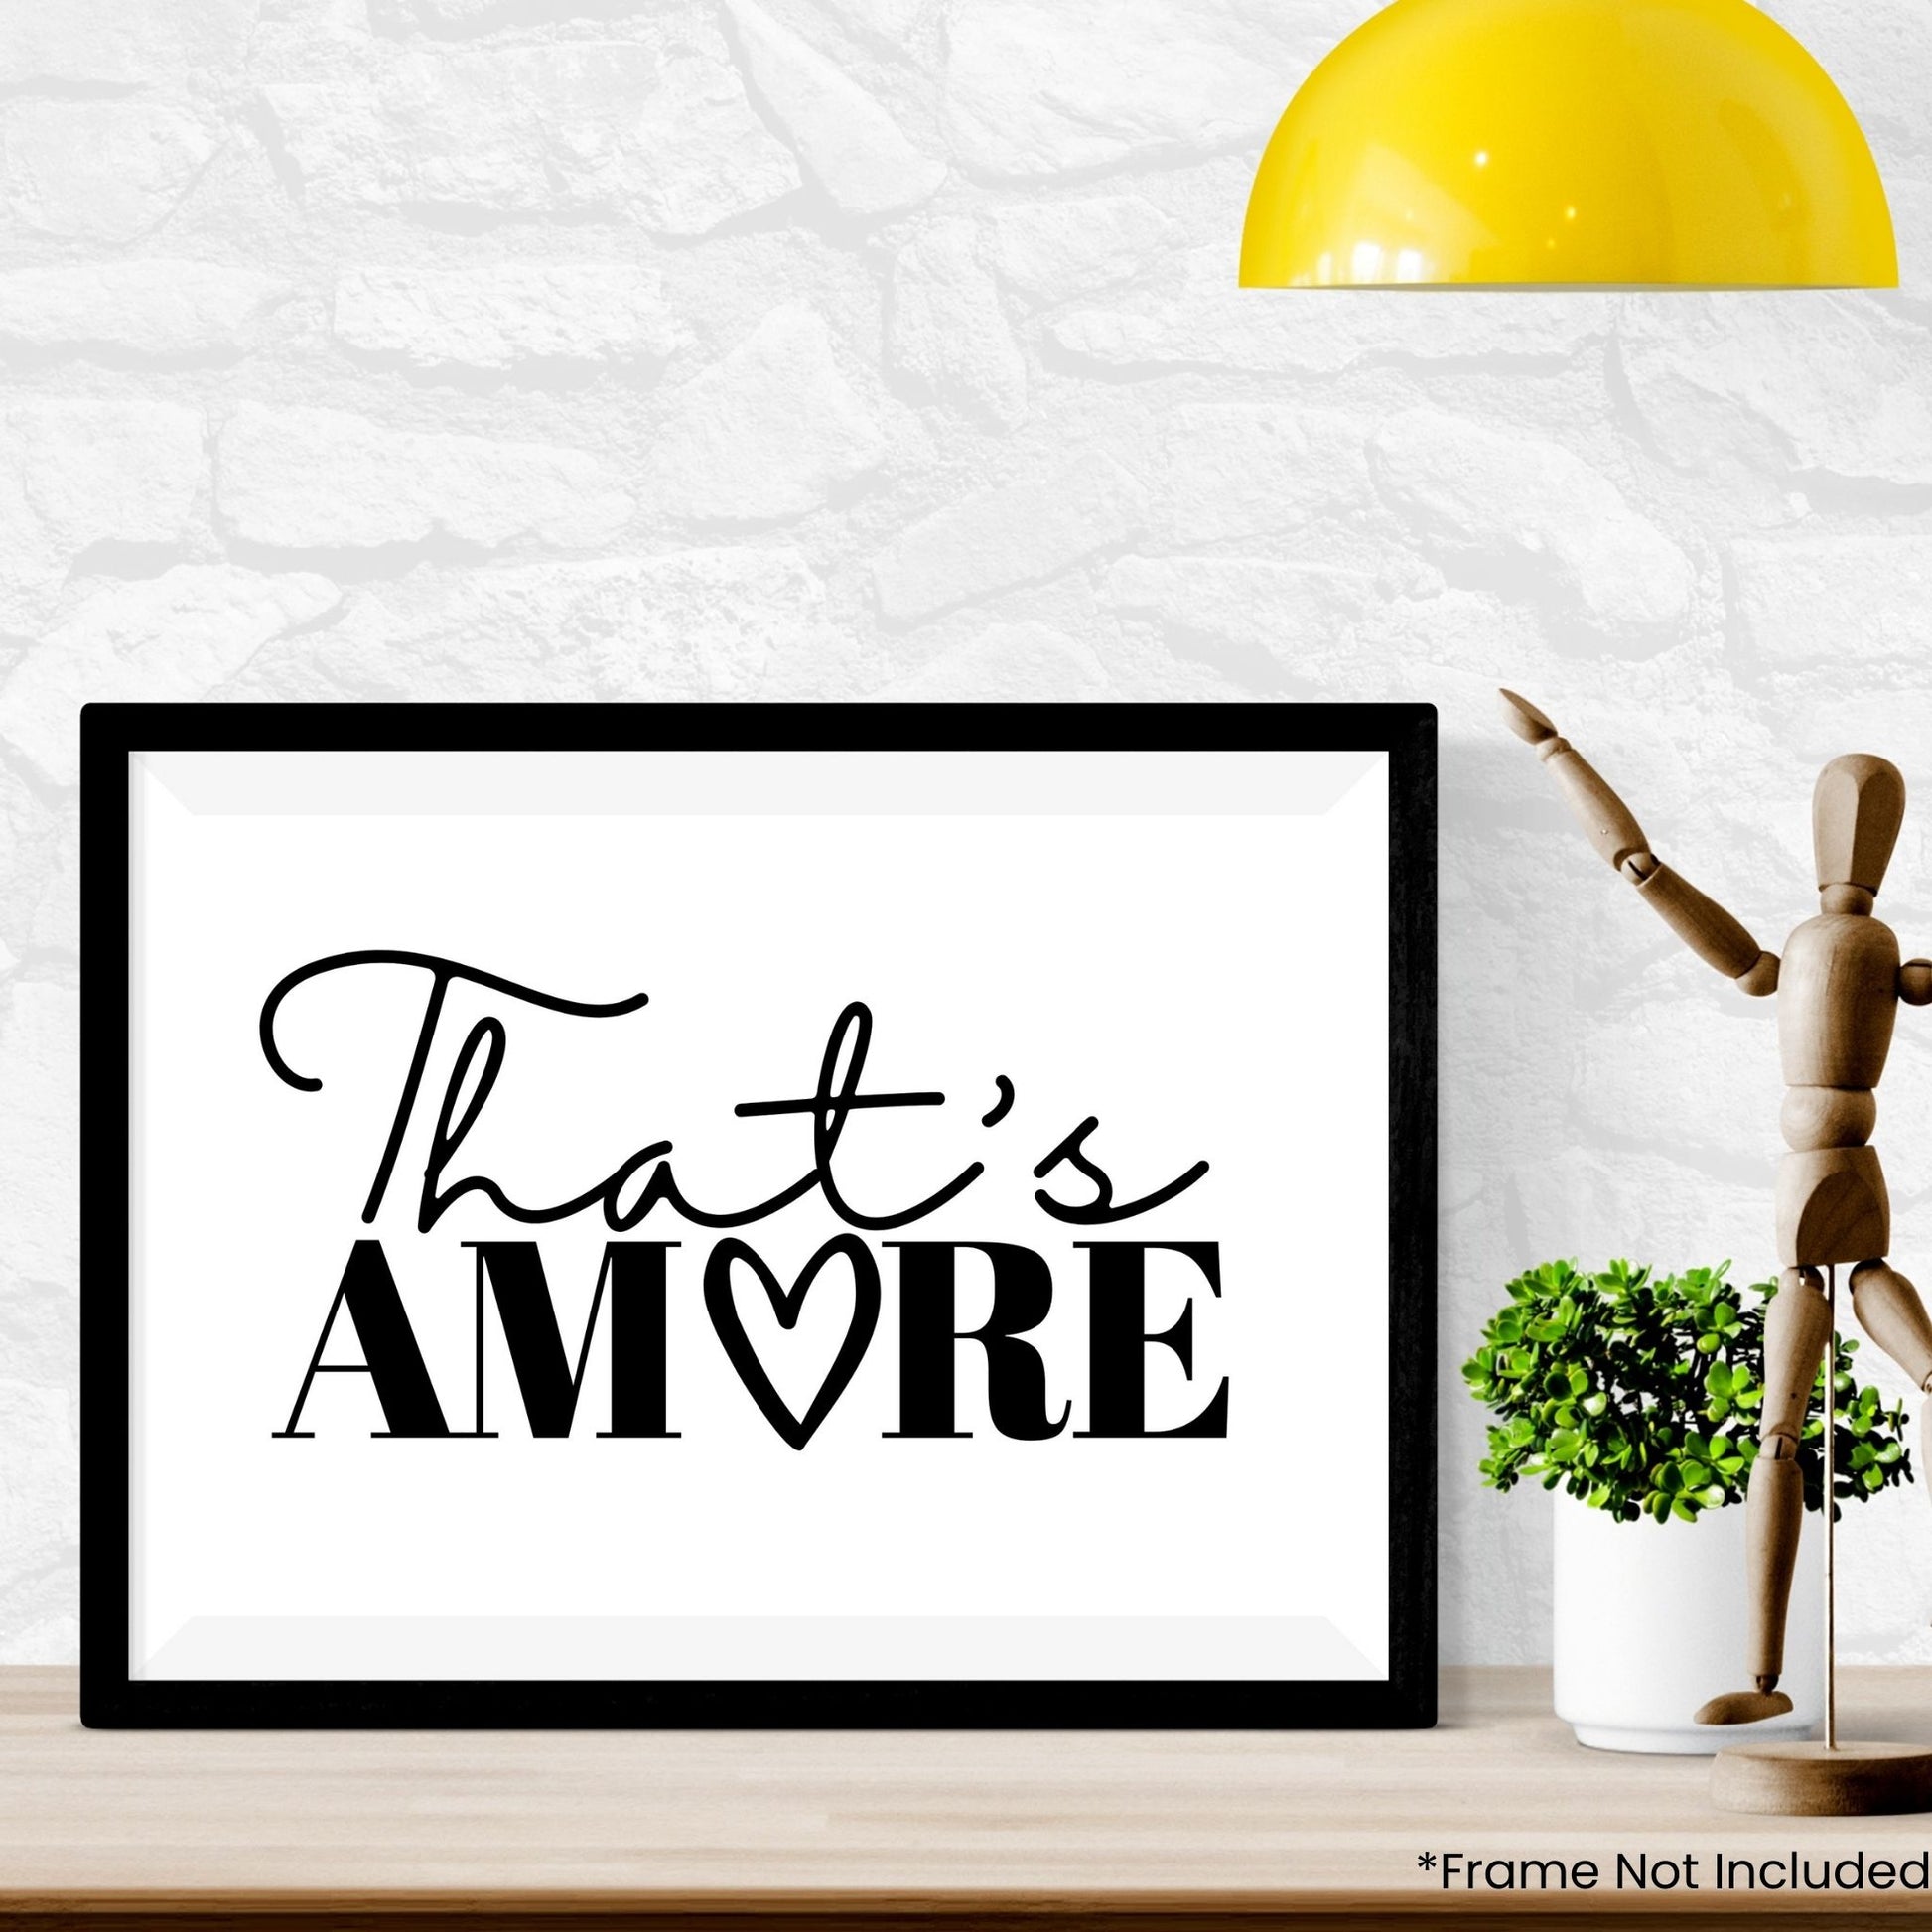 thats-amore in frame